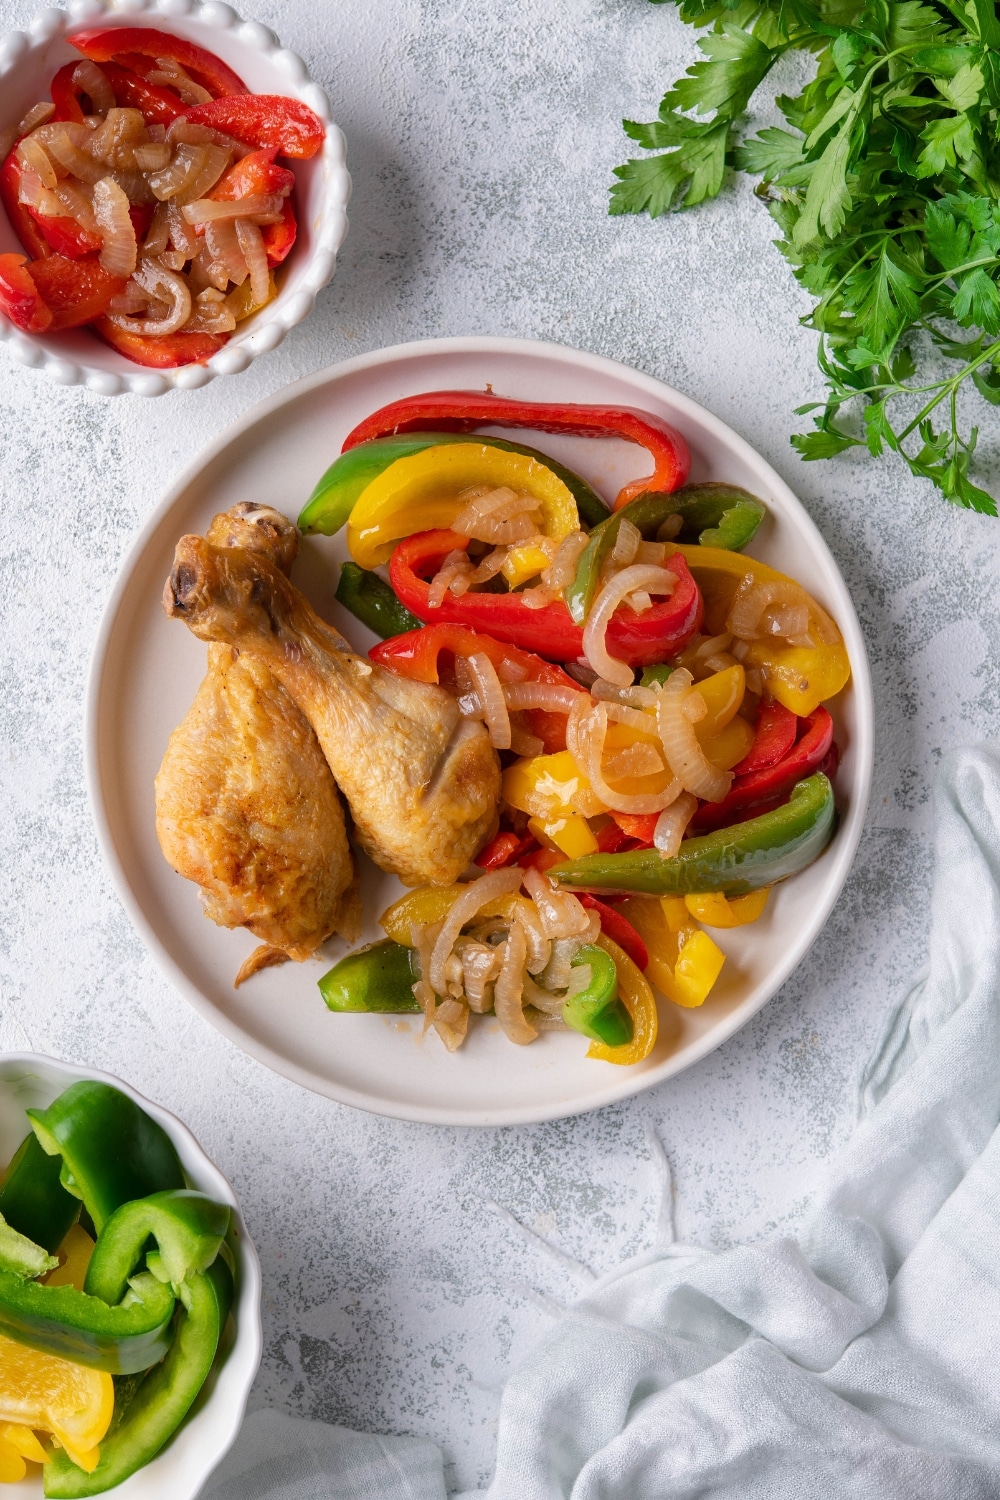 Top view of sauteed bell peppers and onions served with fried chicken on a white plate. Next to it is a small bowl with more sauteed bell peppers and onions and a bowl of uncooked sliced peppers.